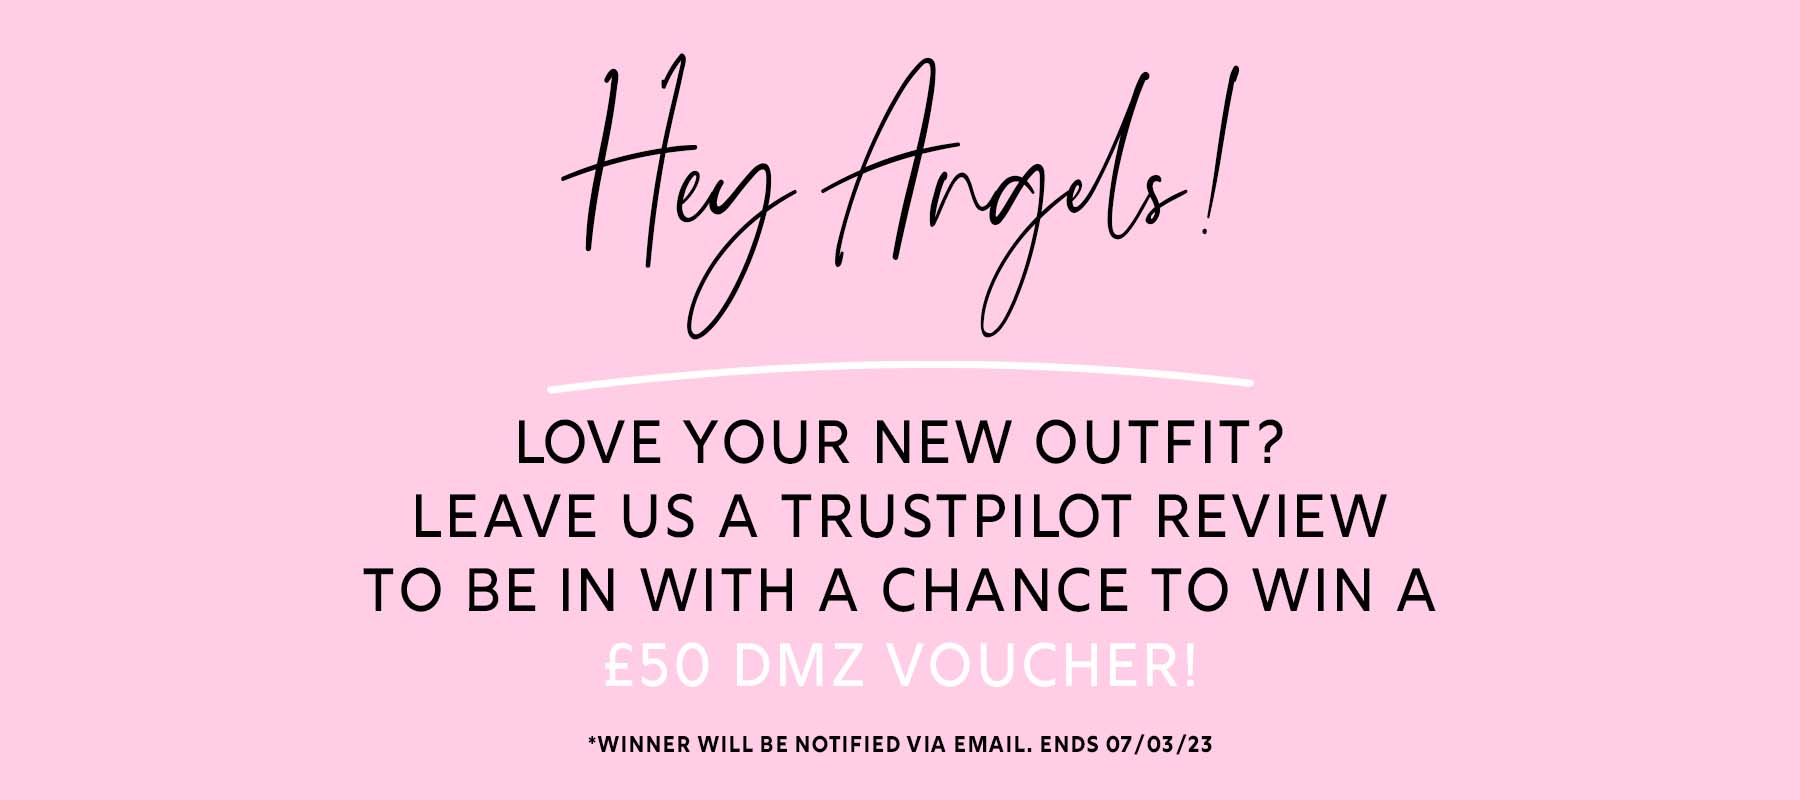 Hy hyt! LOVE YOUR NEW OUTFIT? LEAVE US A TRUSTPILOT REVIEW TO BE IN WITH A CHANCE TO WIN A *WINNER WILL BE NOTIFIED VIA EMAIL. ENDS 070323 